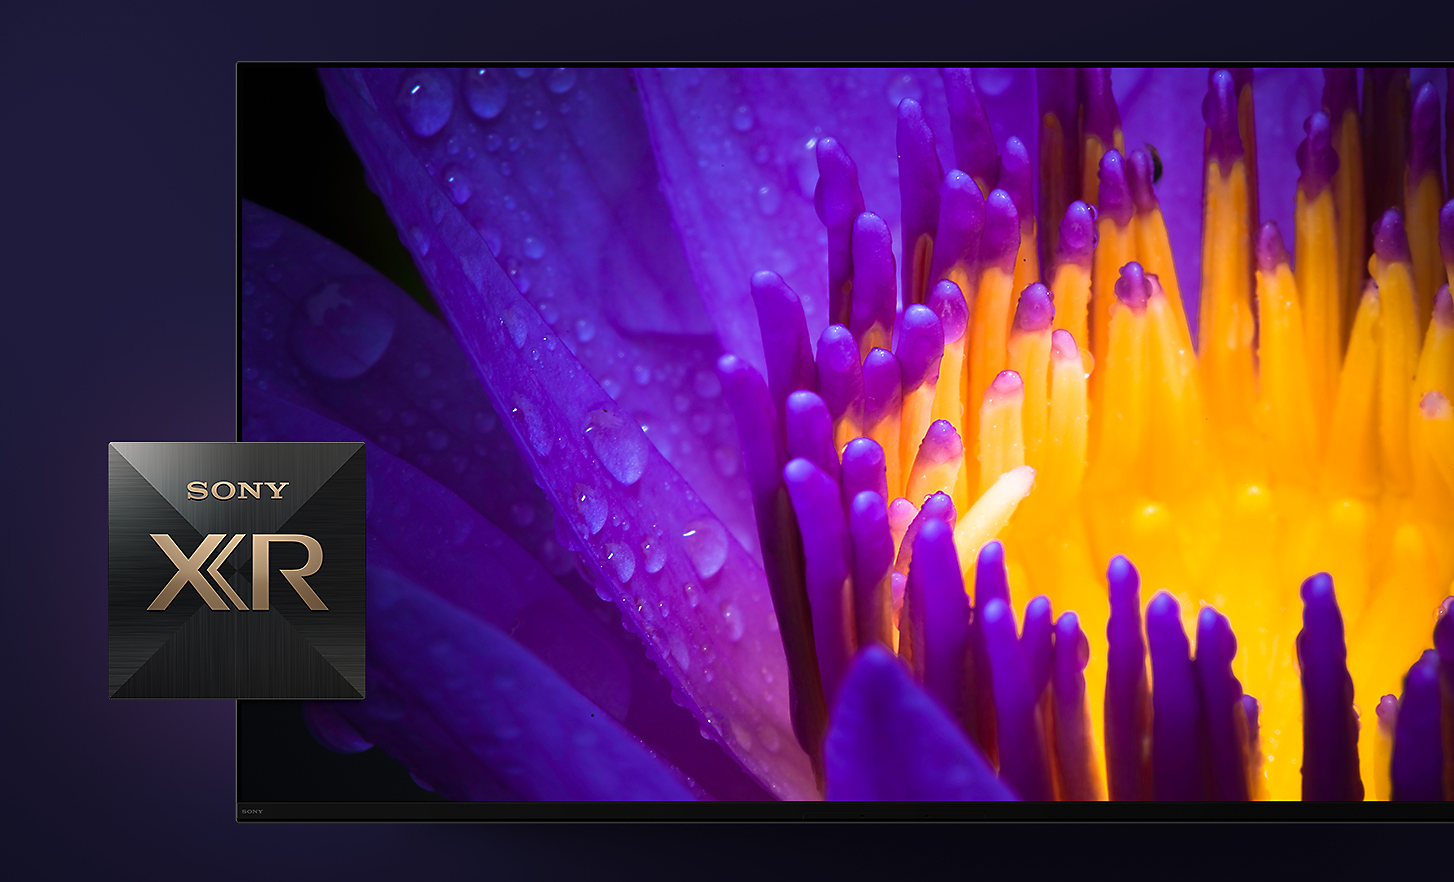 Detail of TV screen showing yellow and purple petals of a flower with Sony XR logo in foreground